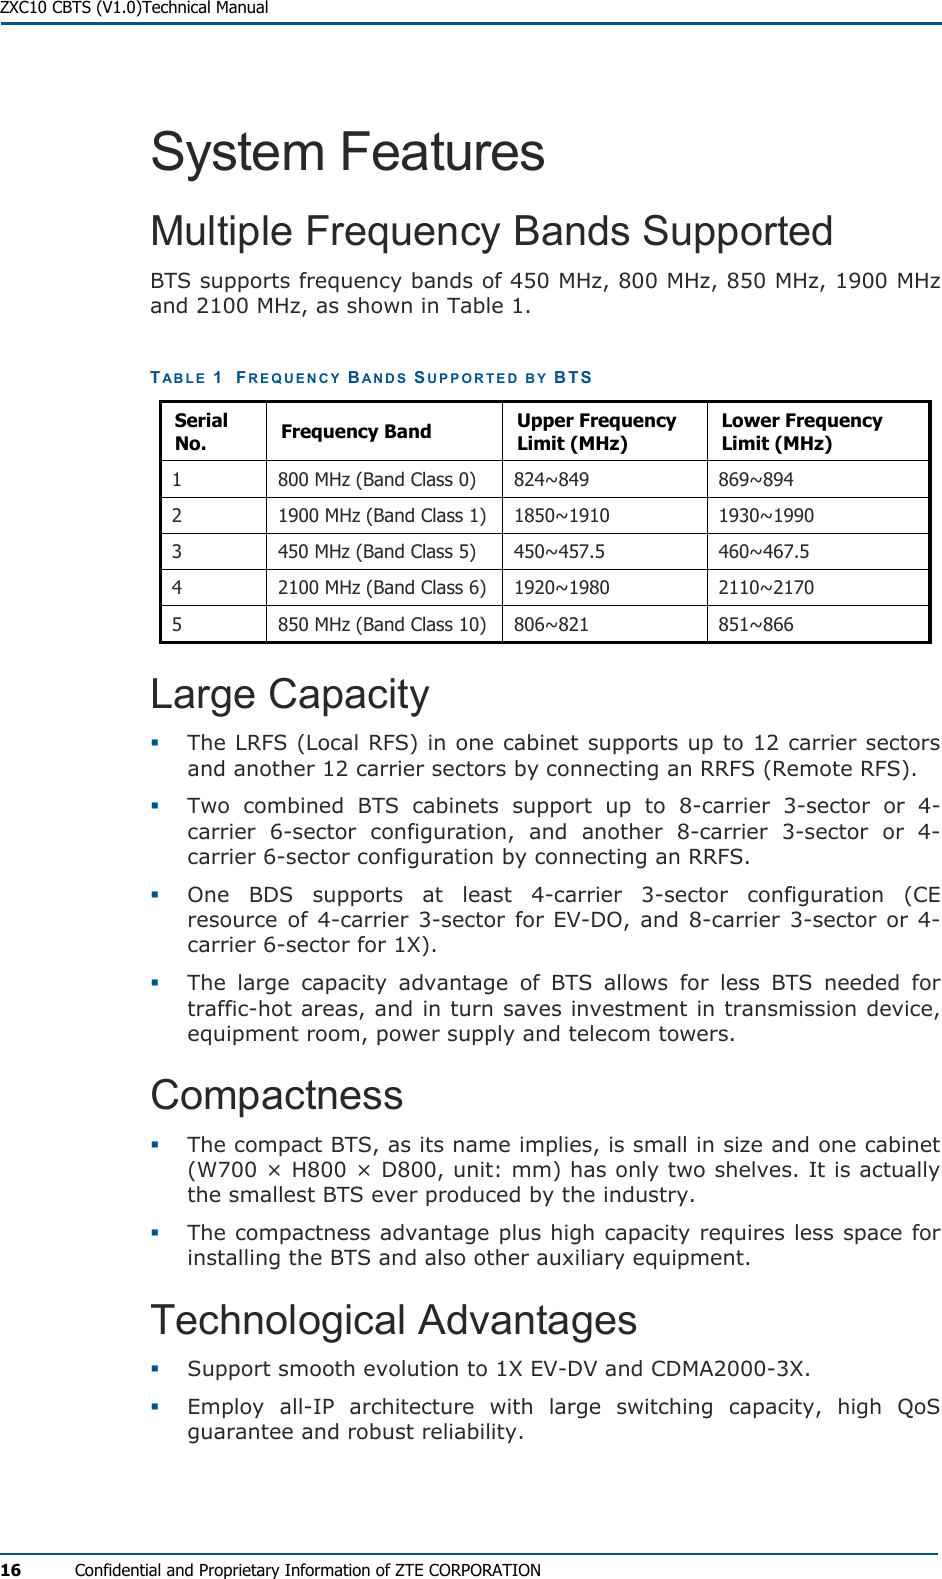  ZXC10 CBTS (V1.0)Technical Manual 16  Confidential and Proprietary Information of ZTE CORPORATION System Features Multiple Frequency Bands Supported BTS supports frequency bands of 450 MHz, 800 MHz, 850 MHz, 1900 MHz and 2100 MHz, as shown in Table 1. TABLE 1  FREQUENCY BANDS SUPPORTED BY BTS Serial No.  Frequency Band  Upper Frequency Limit (MHz) Lower Frequency Limit (MHz) 1  800 MHz (Band Class 0)  824~849  869~894 2  1900 MHz (Band Class 1) 1850~1910  1930~1990 3  450 MHz (Band Class 5)  450~457.5  460~467.5 4  2100 MHz (Band Class 6) 1920~1980  2110~2170 5  850 MHz (Band Class 10) 806~821  851~866 Large Capacity   The LRFS (Local RFS) in one cabinet supports up to 12 carrier sectors and another 12 carrier sectors by connecting an RRFS (Remote RFS).    Two combined BTS cabinets support up to 8-carrier 3-sector or 4-carrier 6-sector configuration, and another 8-carrier 3-sector or 4-carrier 6-sector configuration by connecting an RRFS.    One BDS supports at least 4-carrier 3-sector configuration (CE resource of 4-carrier 3-sector for EV-DO, and 8-carrier 3-sector or 4-carrier 6-sector for 1X).    The large capacity advantage of BTS allows for less BTS needed for traffic-hot areas, and in turn saves investment in transmission device, equipment room, power supply and telecom towers. Compactness   The compact BTS, as its name implies, is small in size and one cabinet (W700 × H800 × D800, unit: mm) has only two shelves. It is actually the smallest BTS ever produced by the industry.    The compactness advantage plus high capacity requires less space for installing the BTS and also other auxiliary equipment. Technological Advantages   Support smooth evolution to 1X EV-DV and CDMA2000-3X.   Employ all-IP architecture with large switching capacity, high QoS guarantee and robust reliability. 